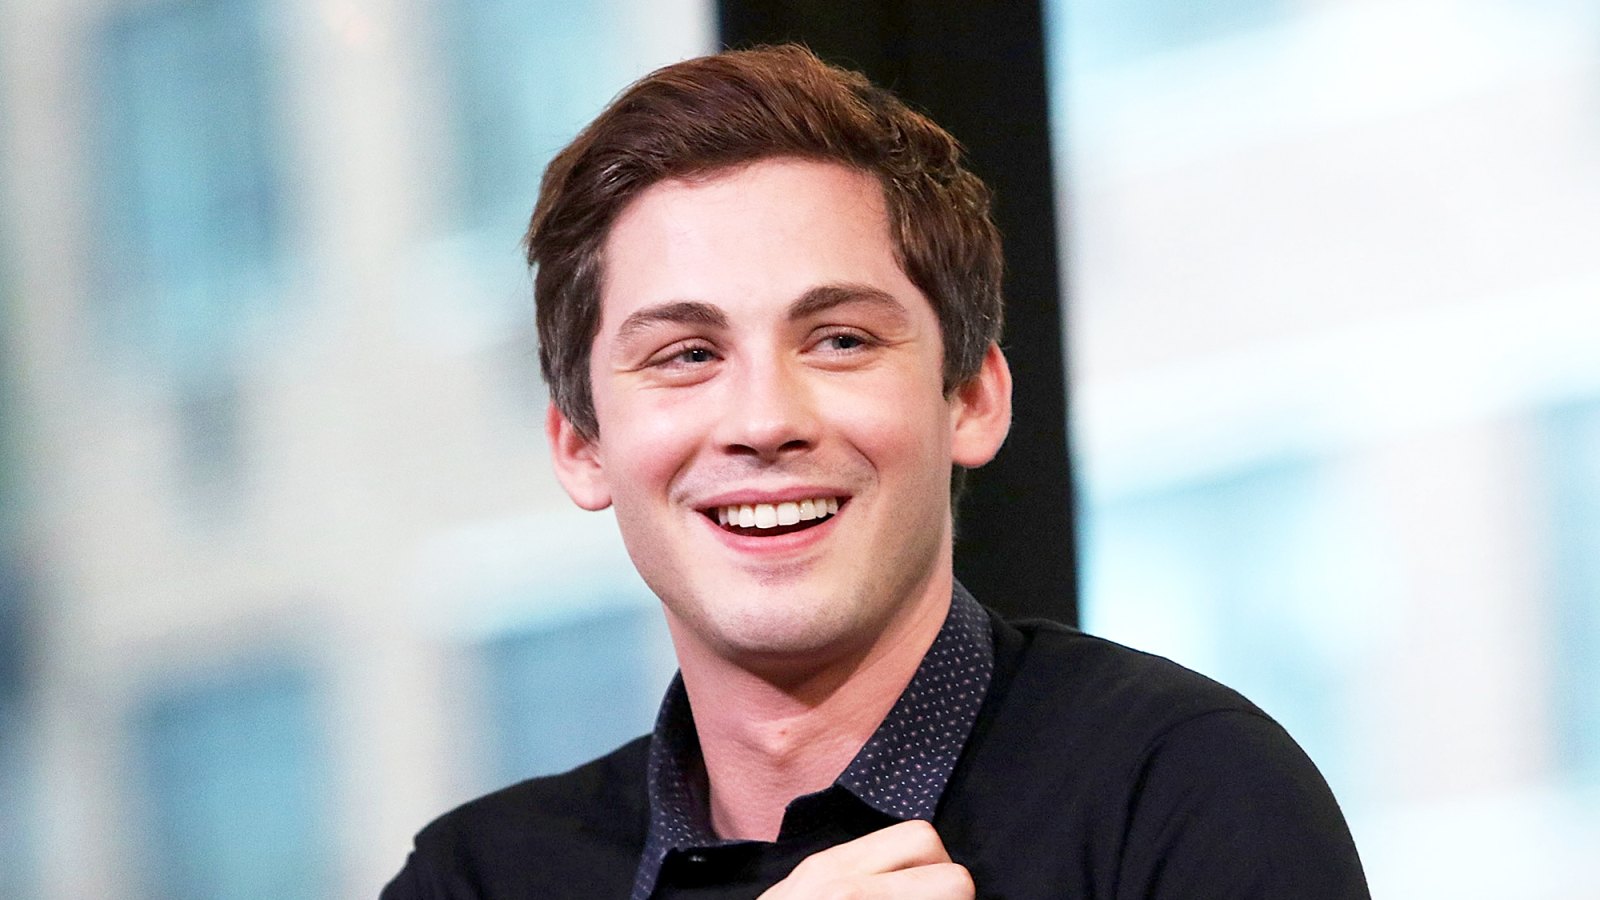 Logan Lerman attends AOL Build Presents to discuss the film "Indignation" at AOL HQ on July 26, 2016 in New York City.